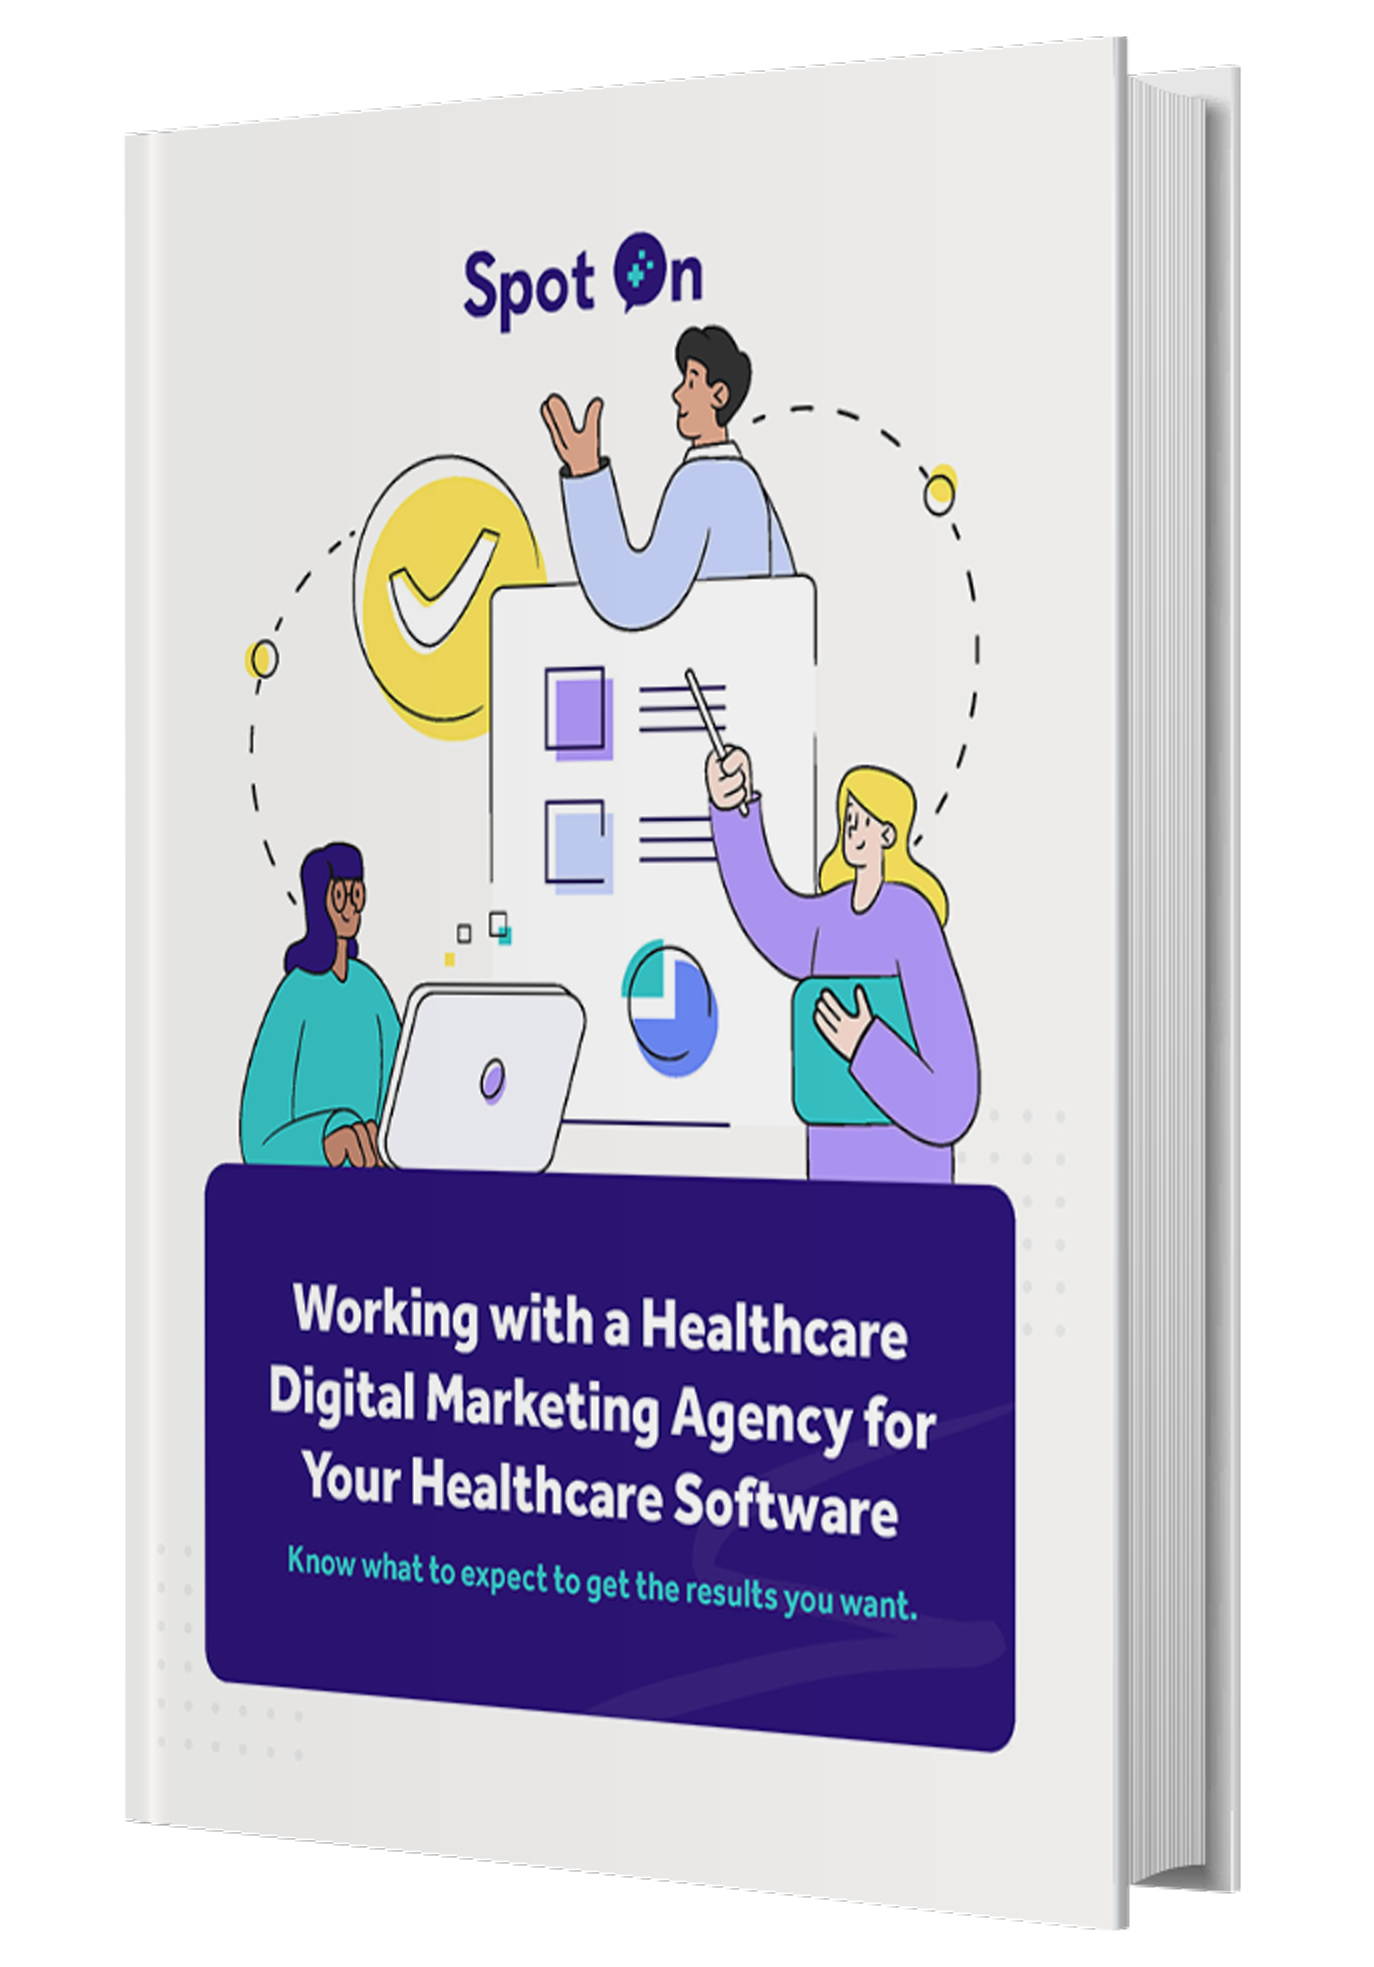 Working with a Healthcare Digital Marketing Agency for Your Healthcare Software